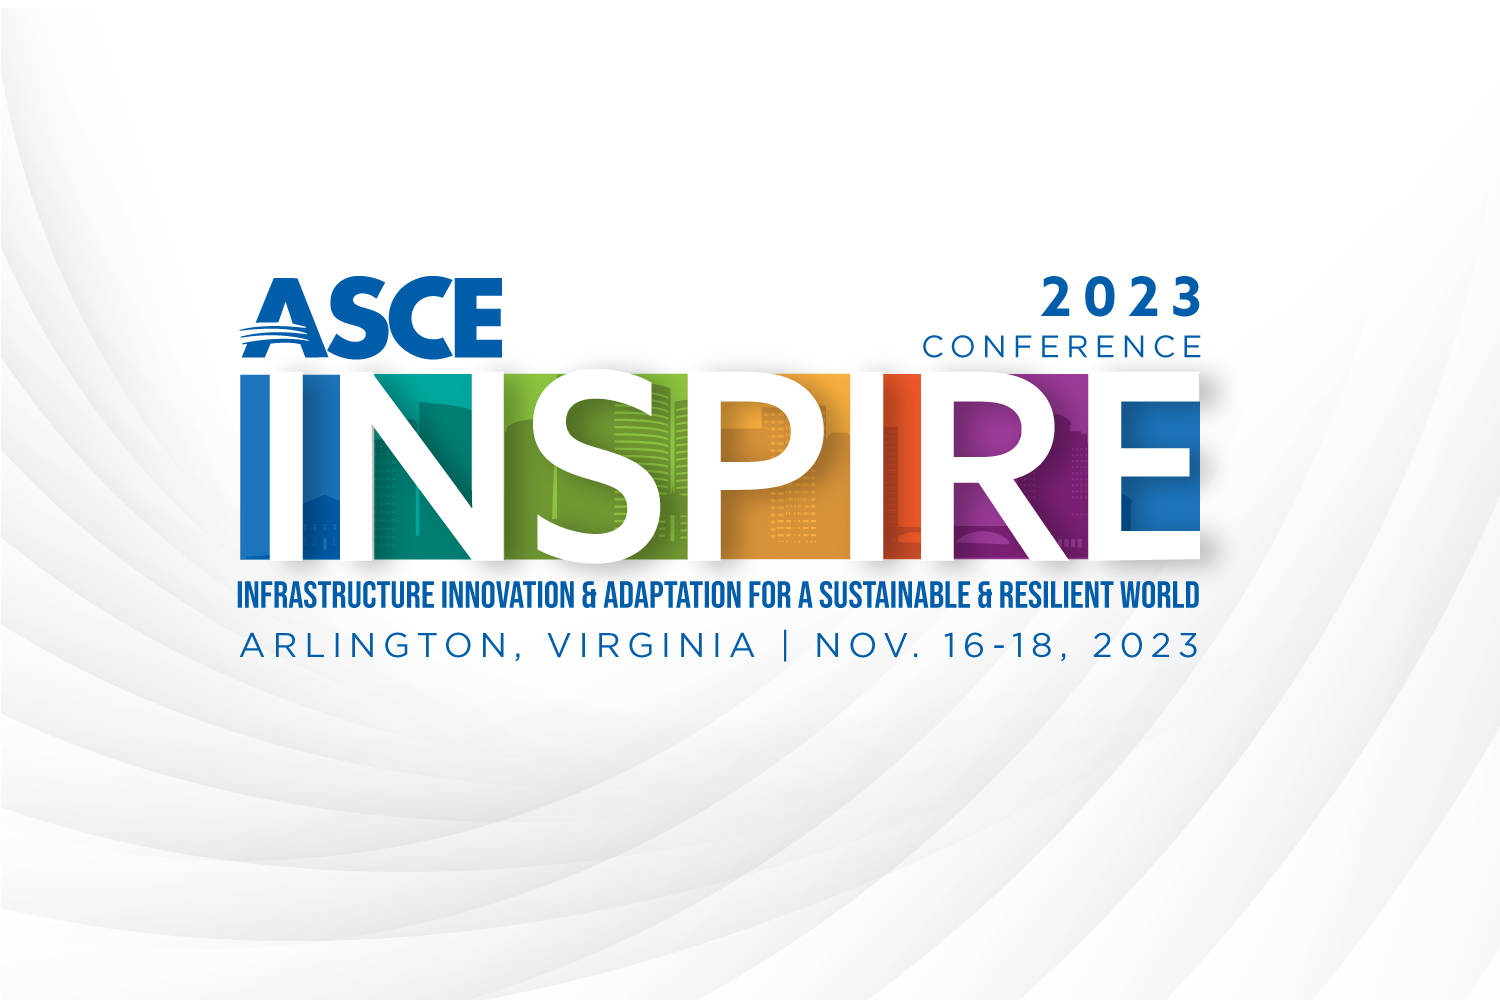 Inspire Conference 2023